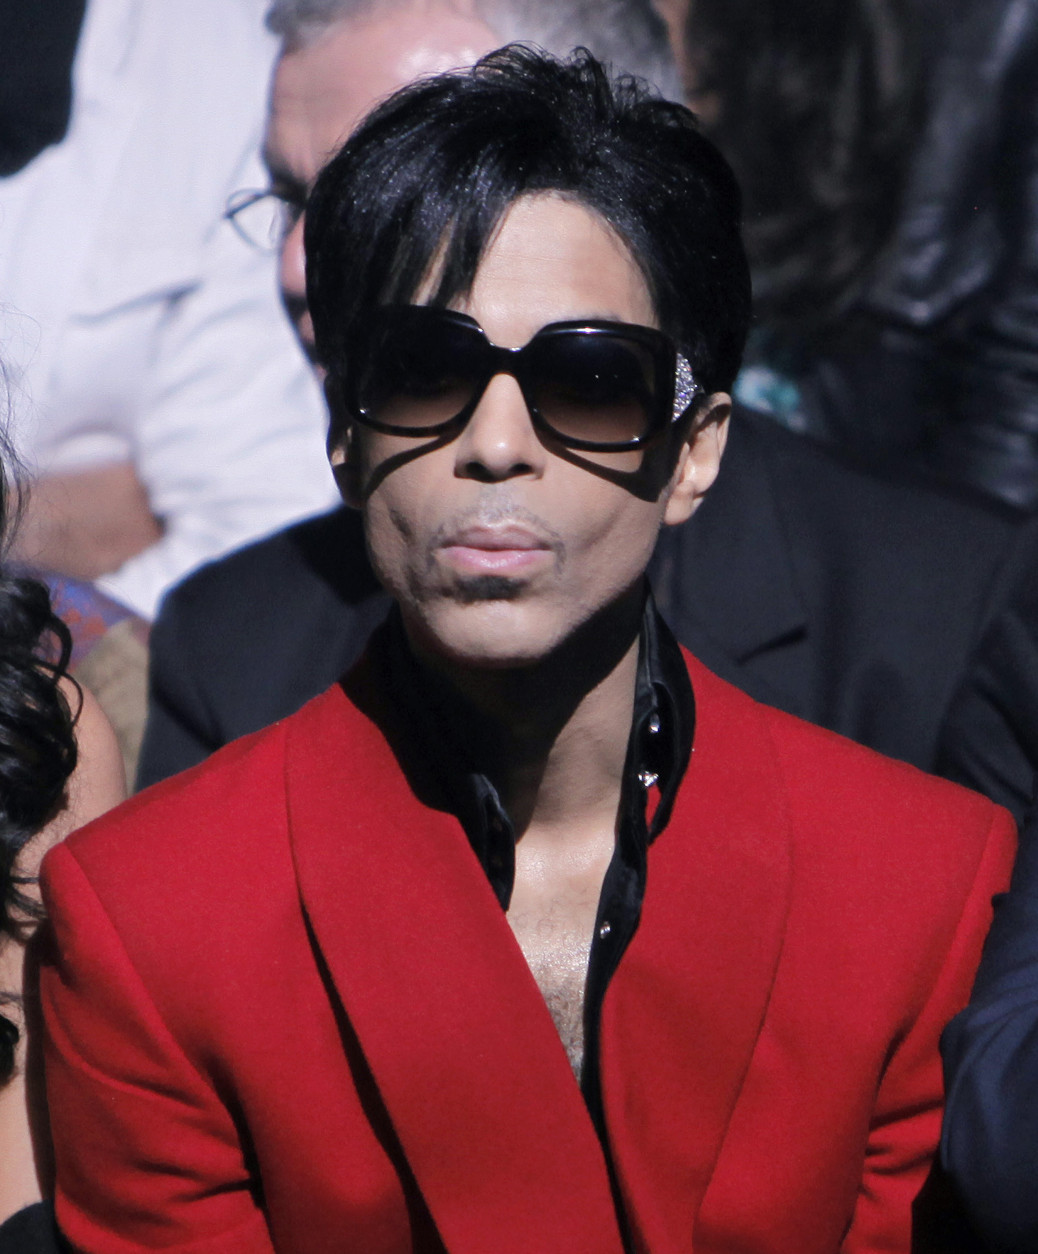 FILE - In this Oct. 7, 2009 file photo, U.S singer Prince attends John Galliano's Spring-Summer 2010 fashion collection, presented in Paris. (AP Photo/Thibault Camus, file)